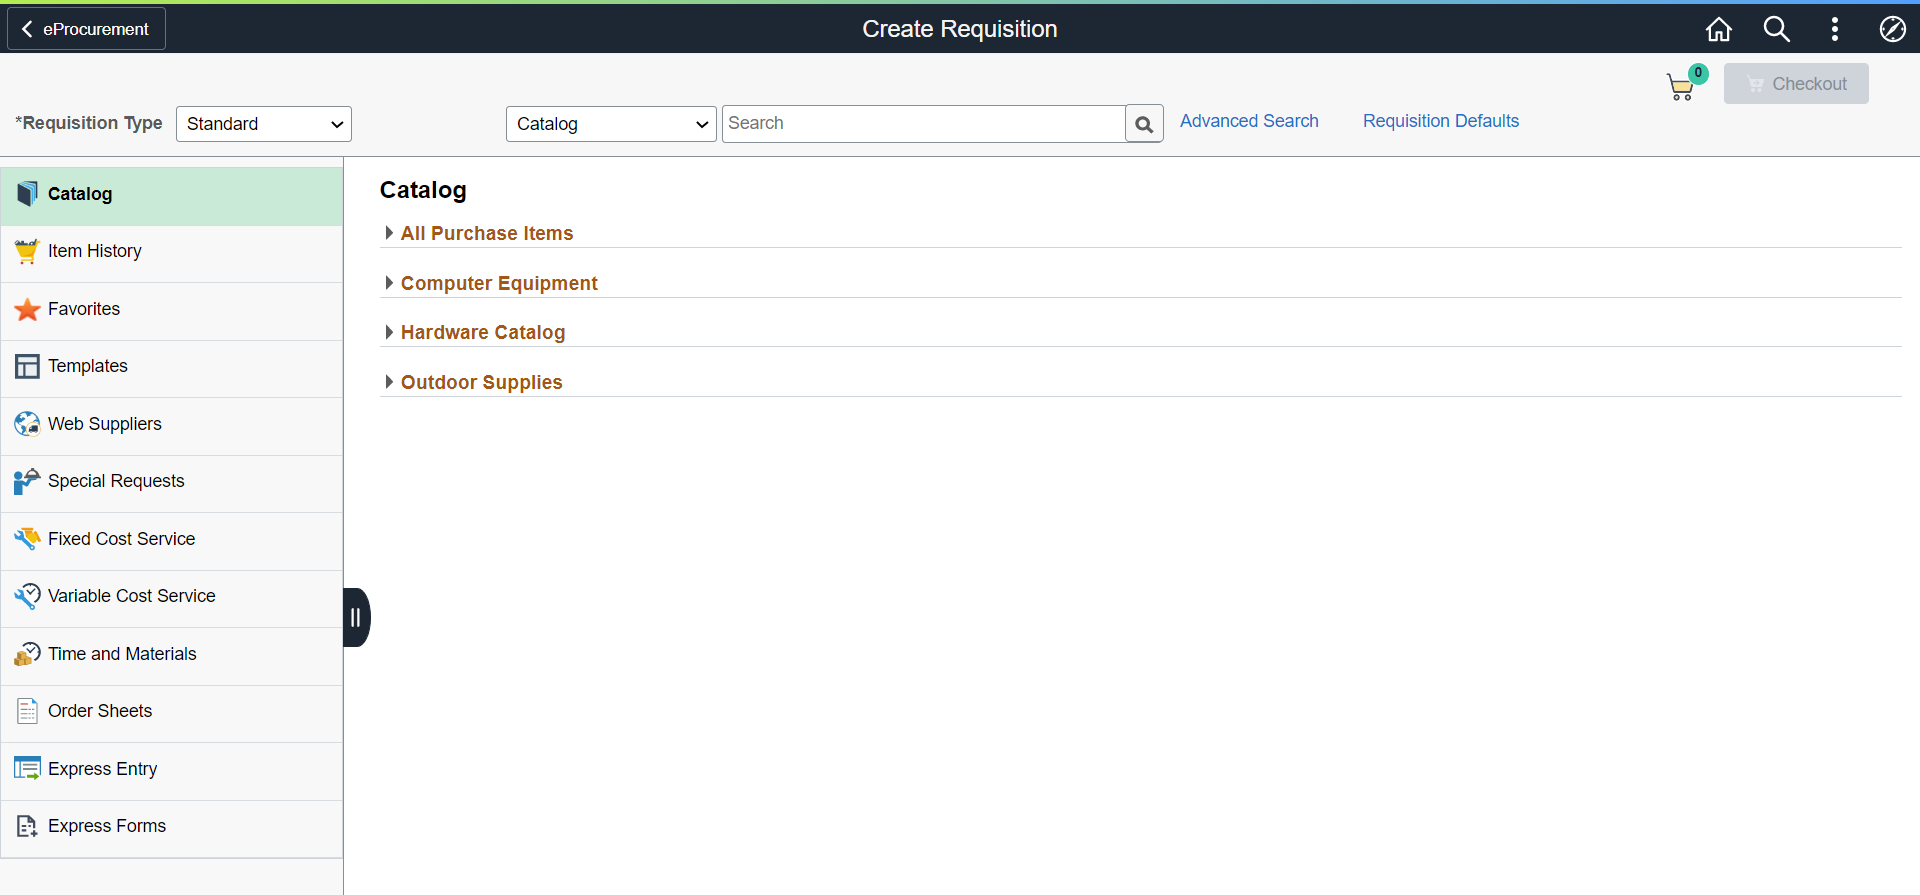 Create Requisition - Browse Catalogs page